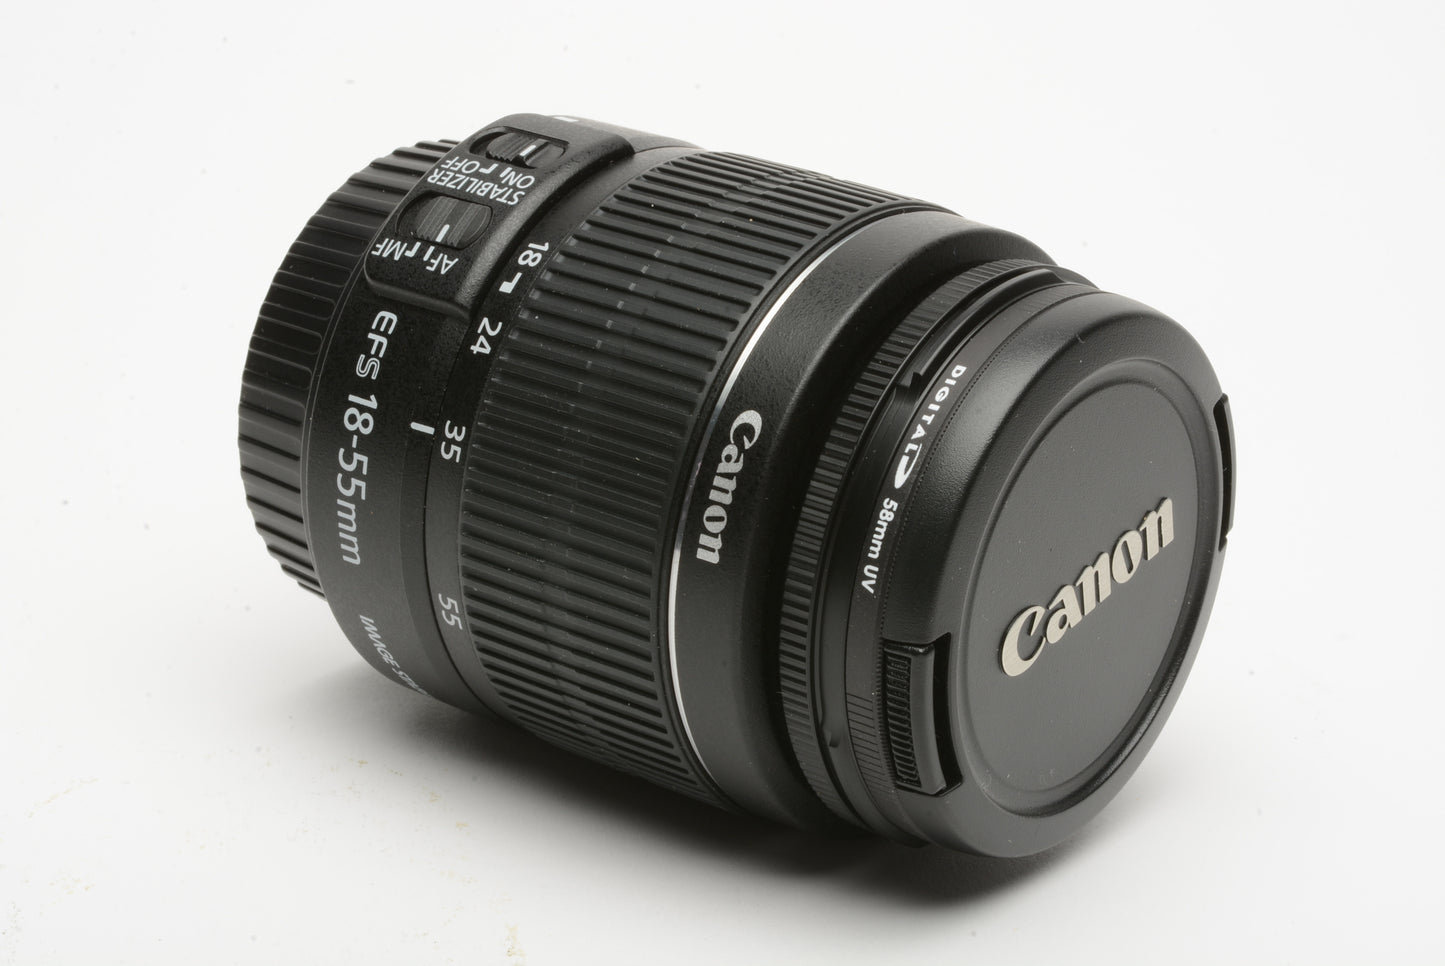 Canon EF-S 18-55mm f3.5-5.6 IS II w/caps, UV filter, very clean